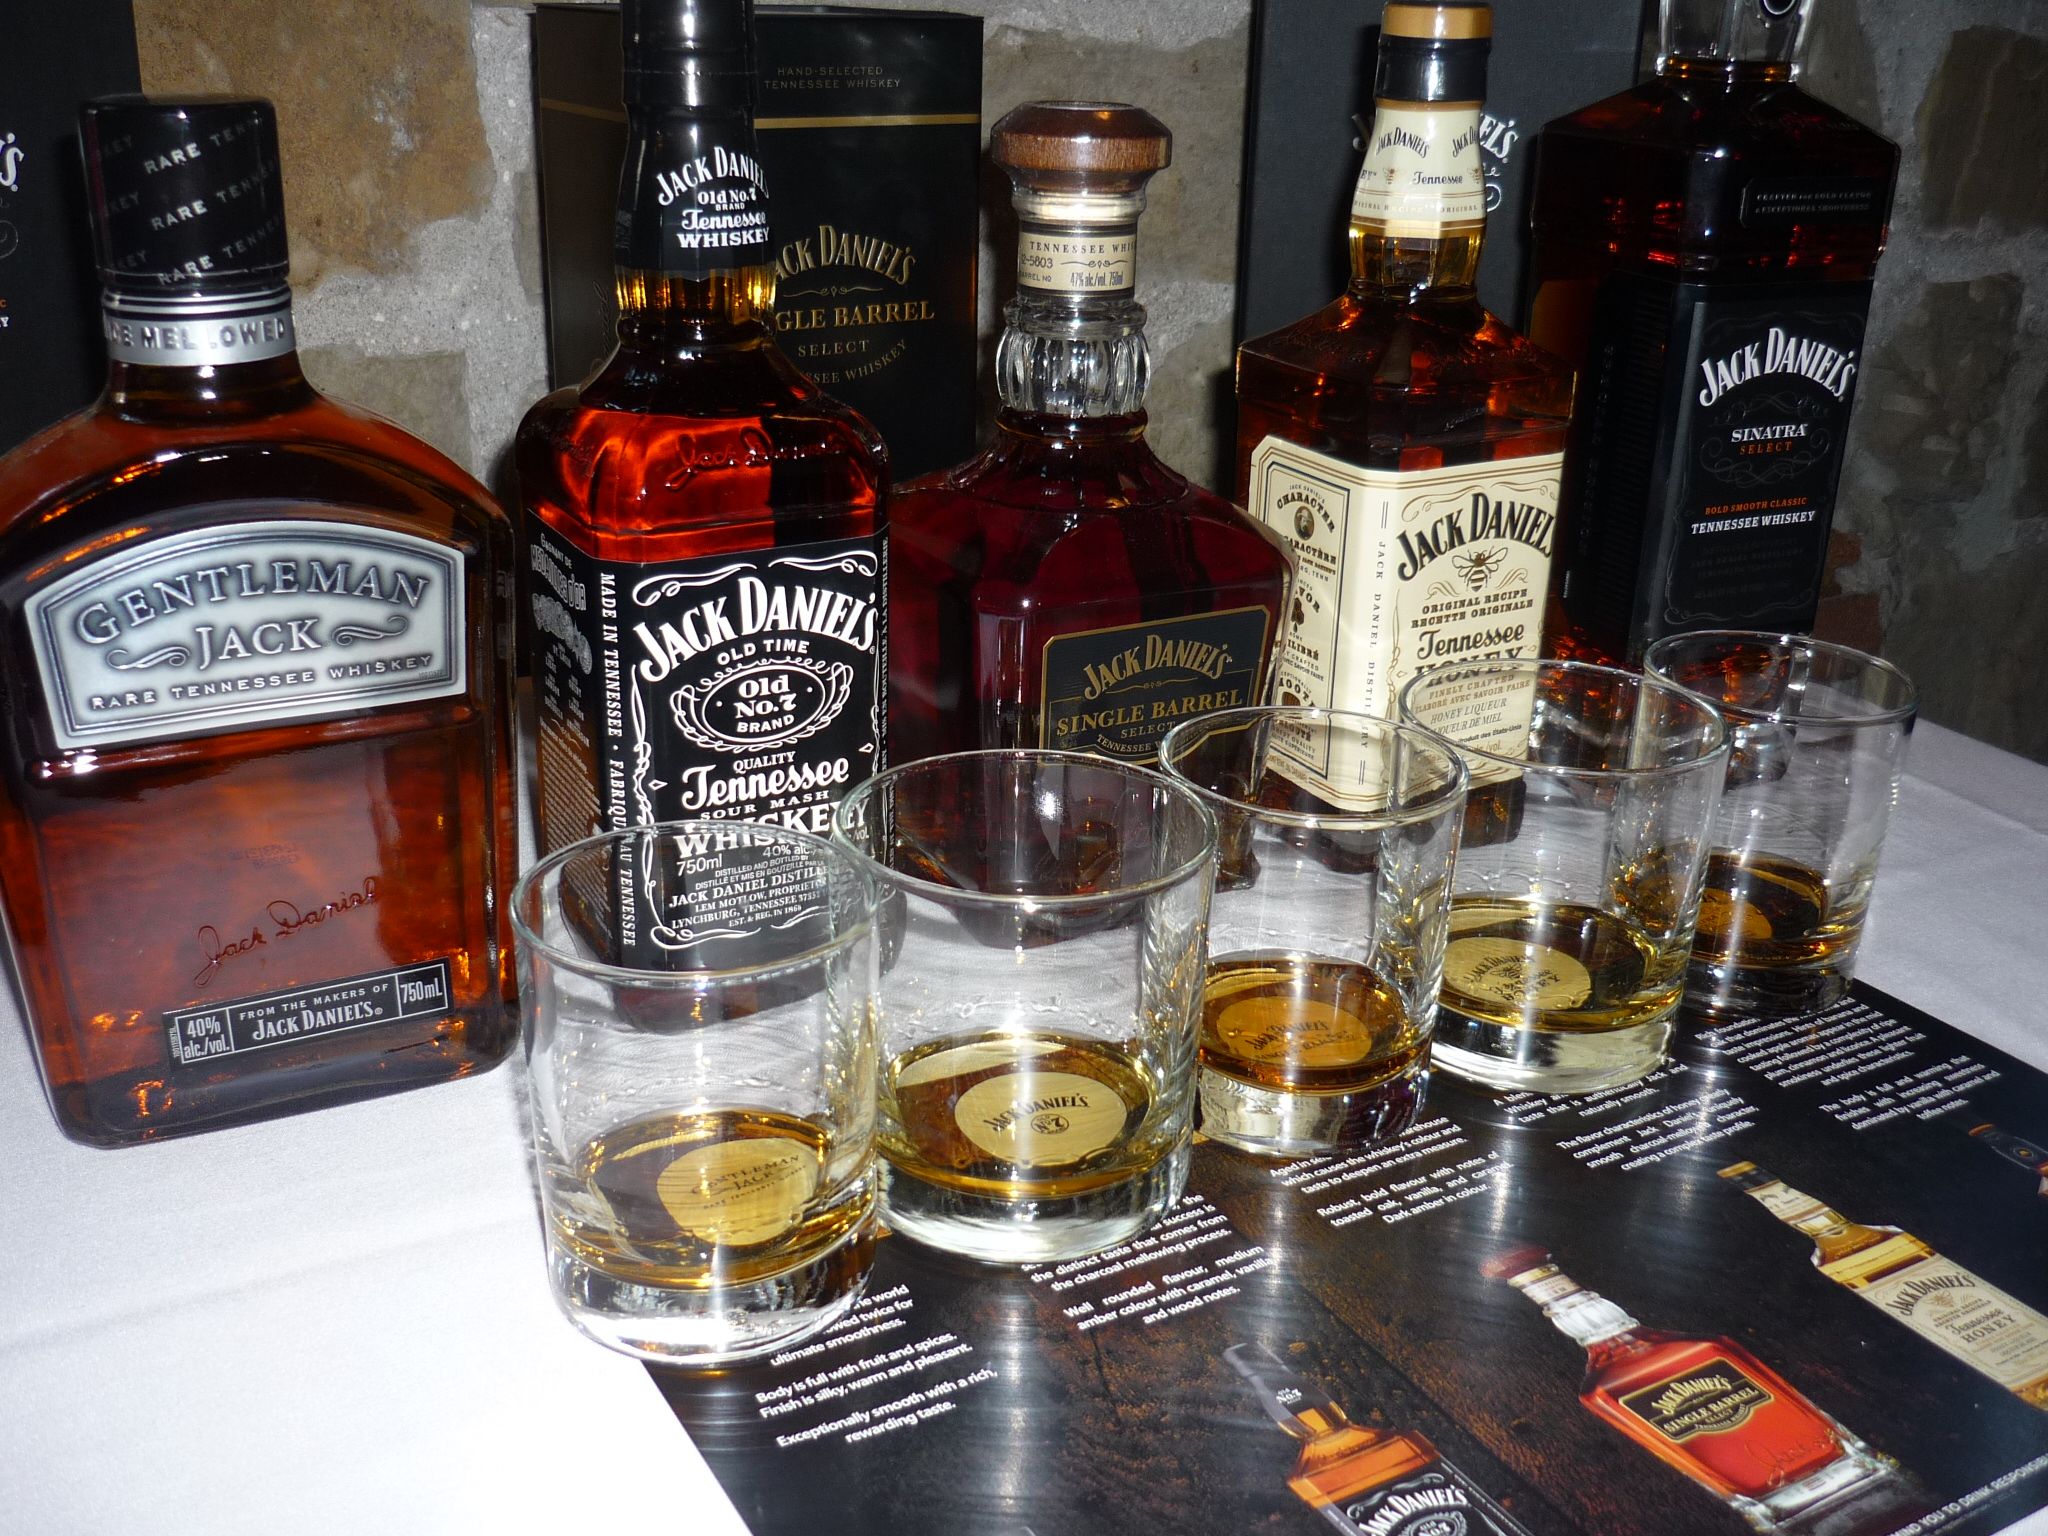 Jack Daniel's rolls out the finest barrels of Tennessee Whiskey